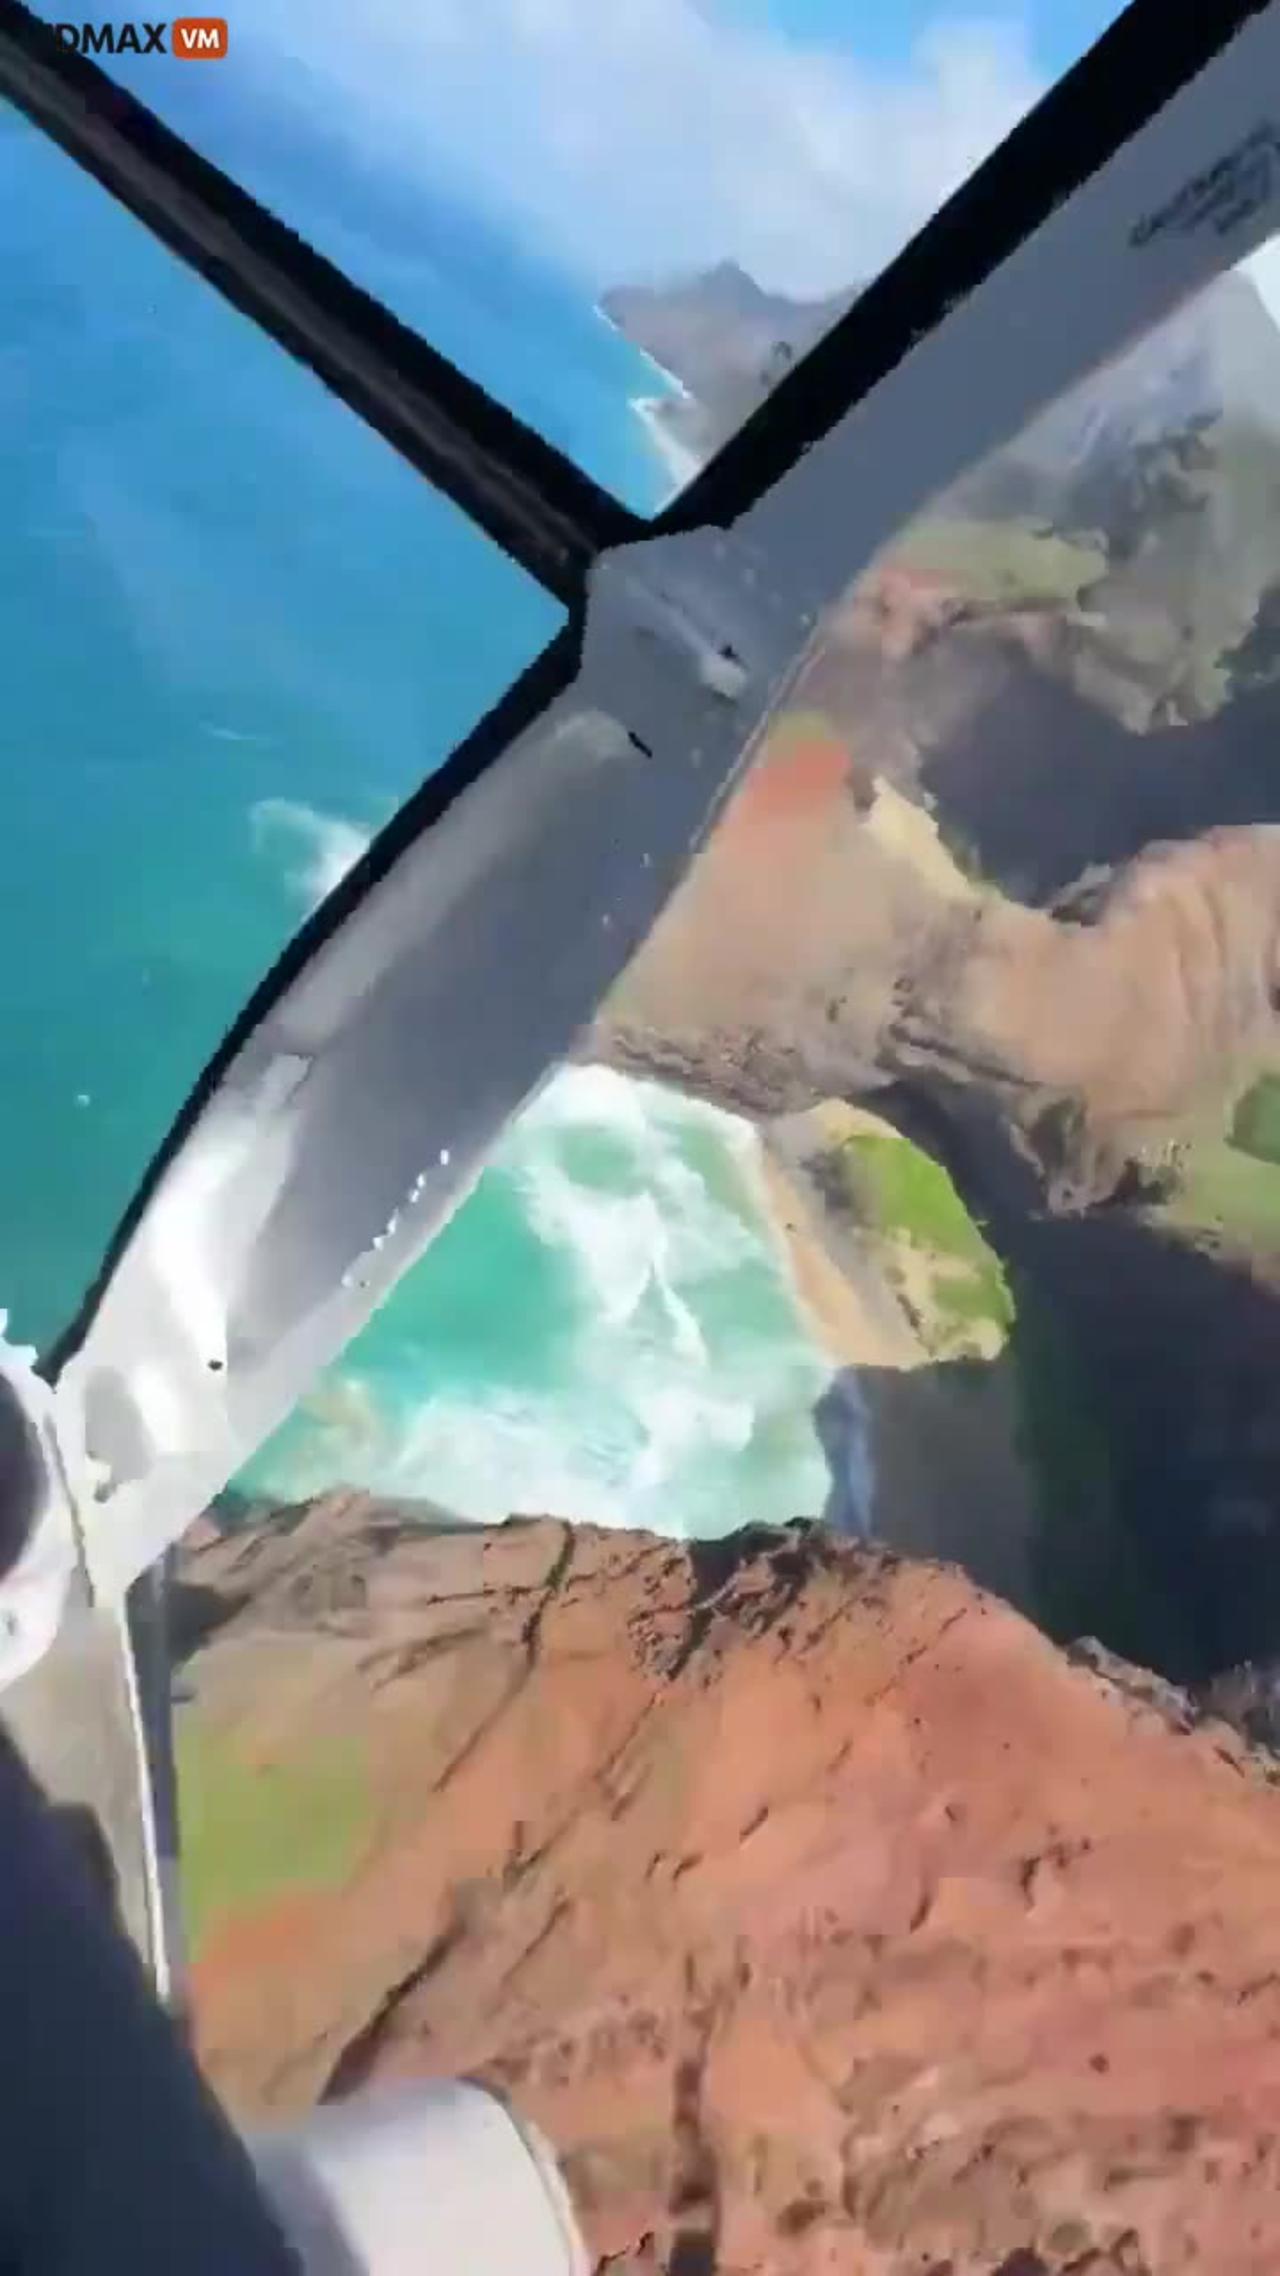 Wild Video Shows Helicopter Crashing On Honopu Beach In Hawaii